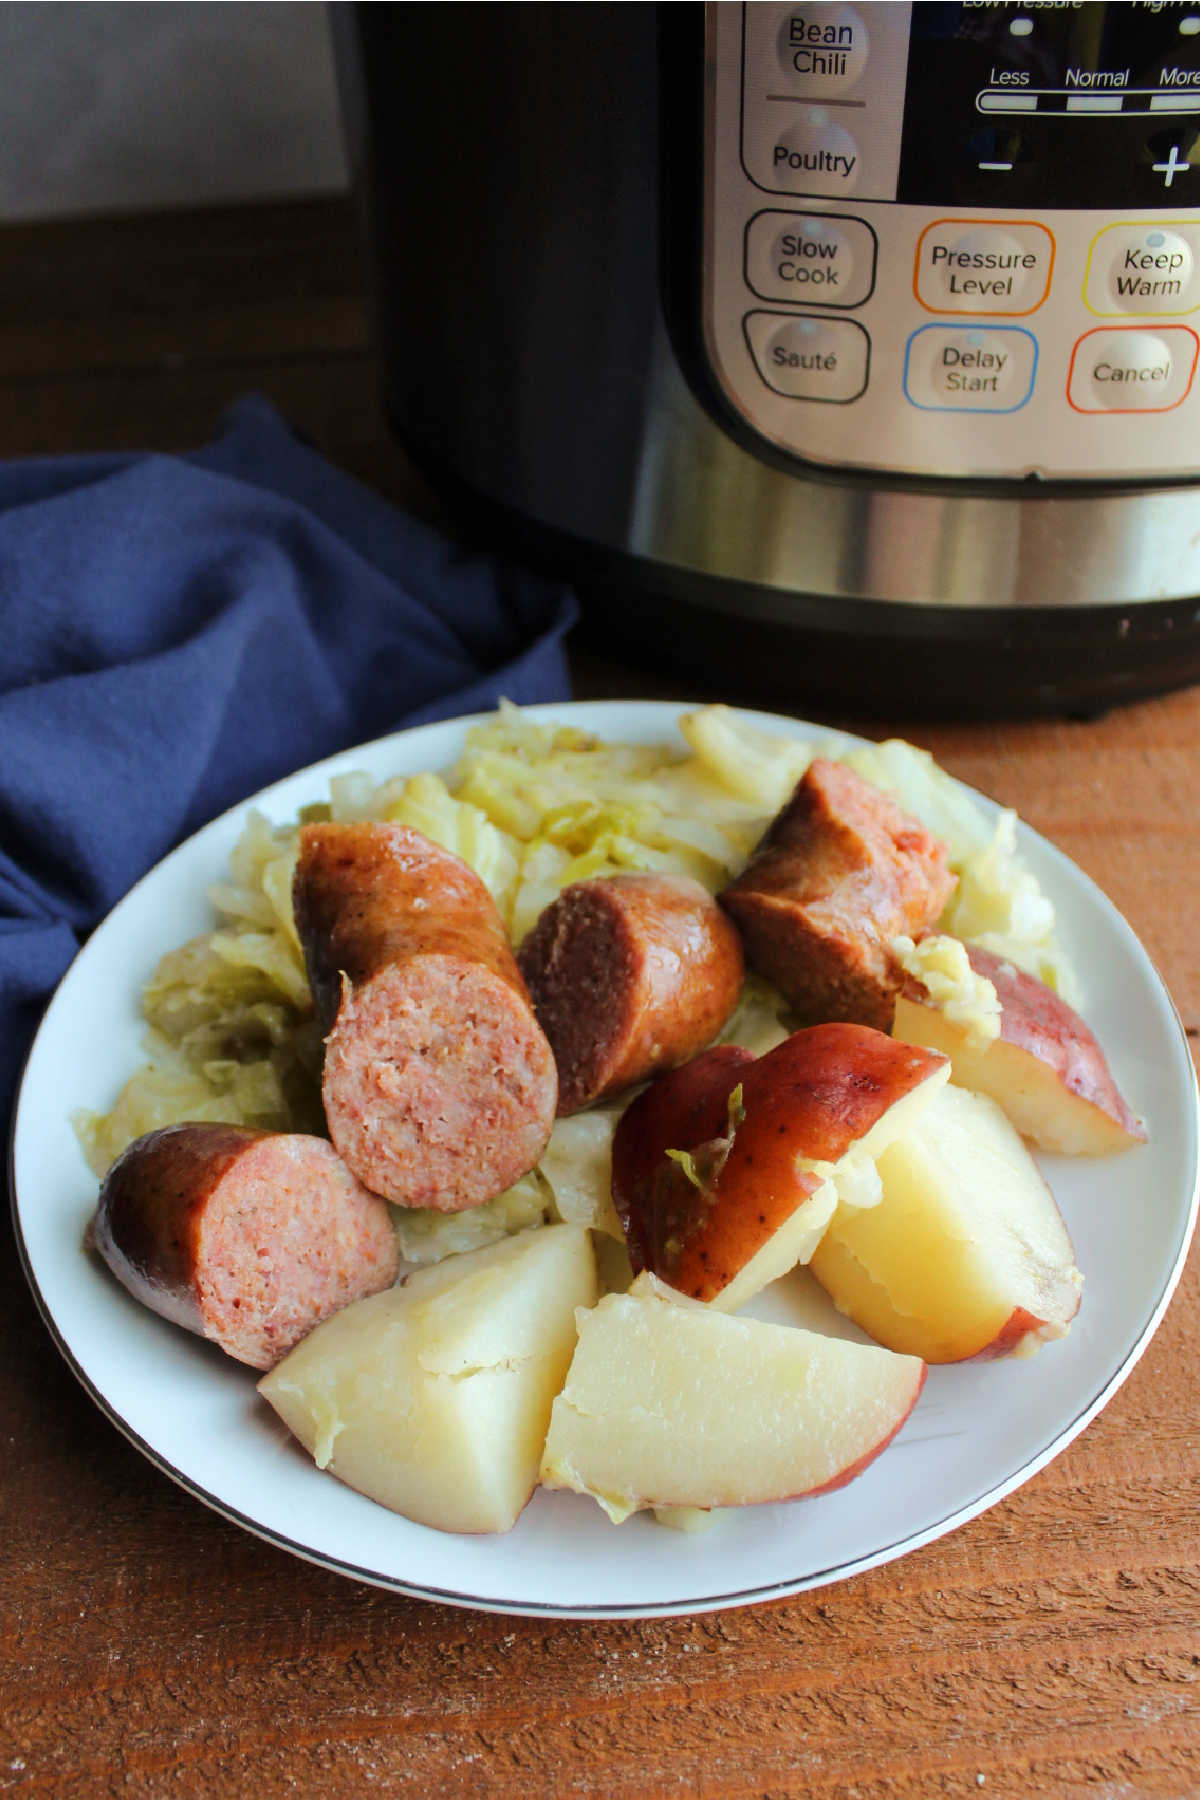 Dinner plate with cabbage, potatoes and keilbasa.